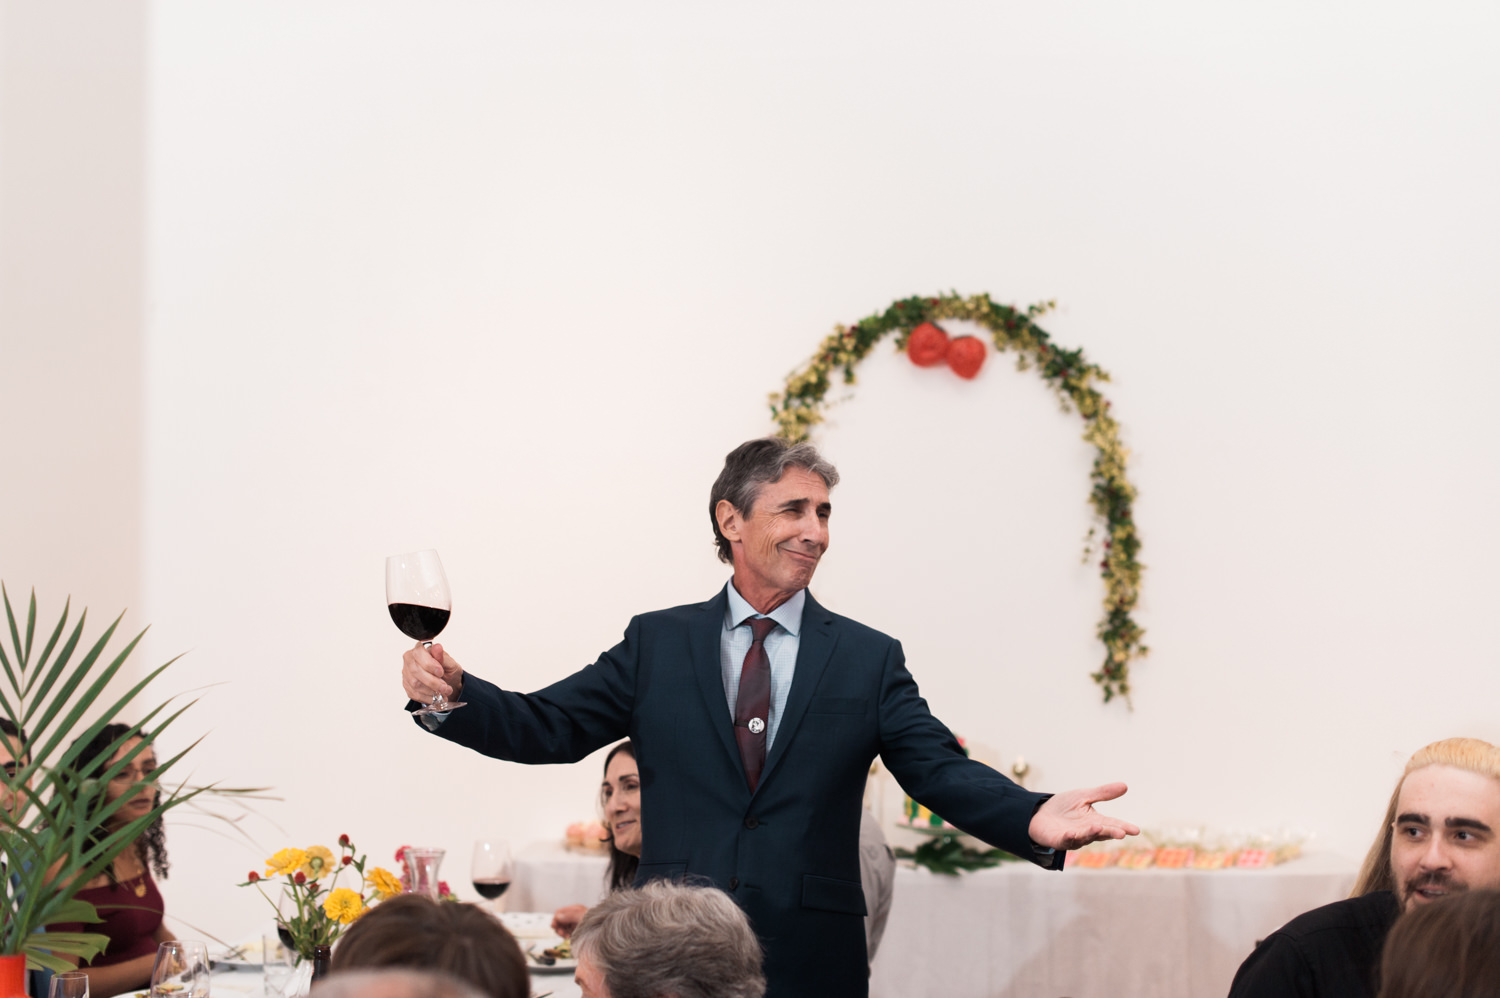 Father of the bride gives a toast at The Cleaners. by Briana Morrison